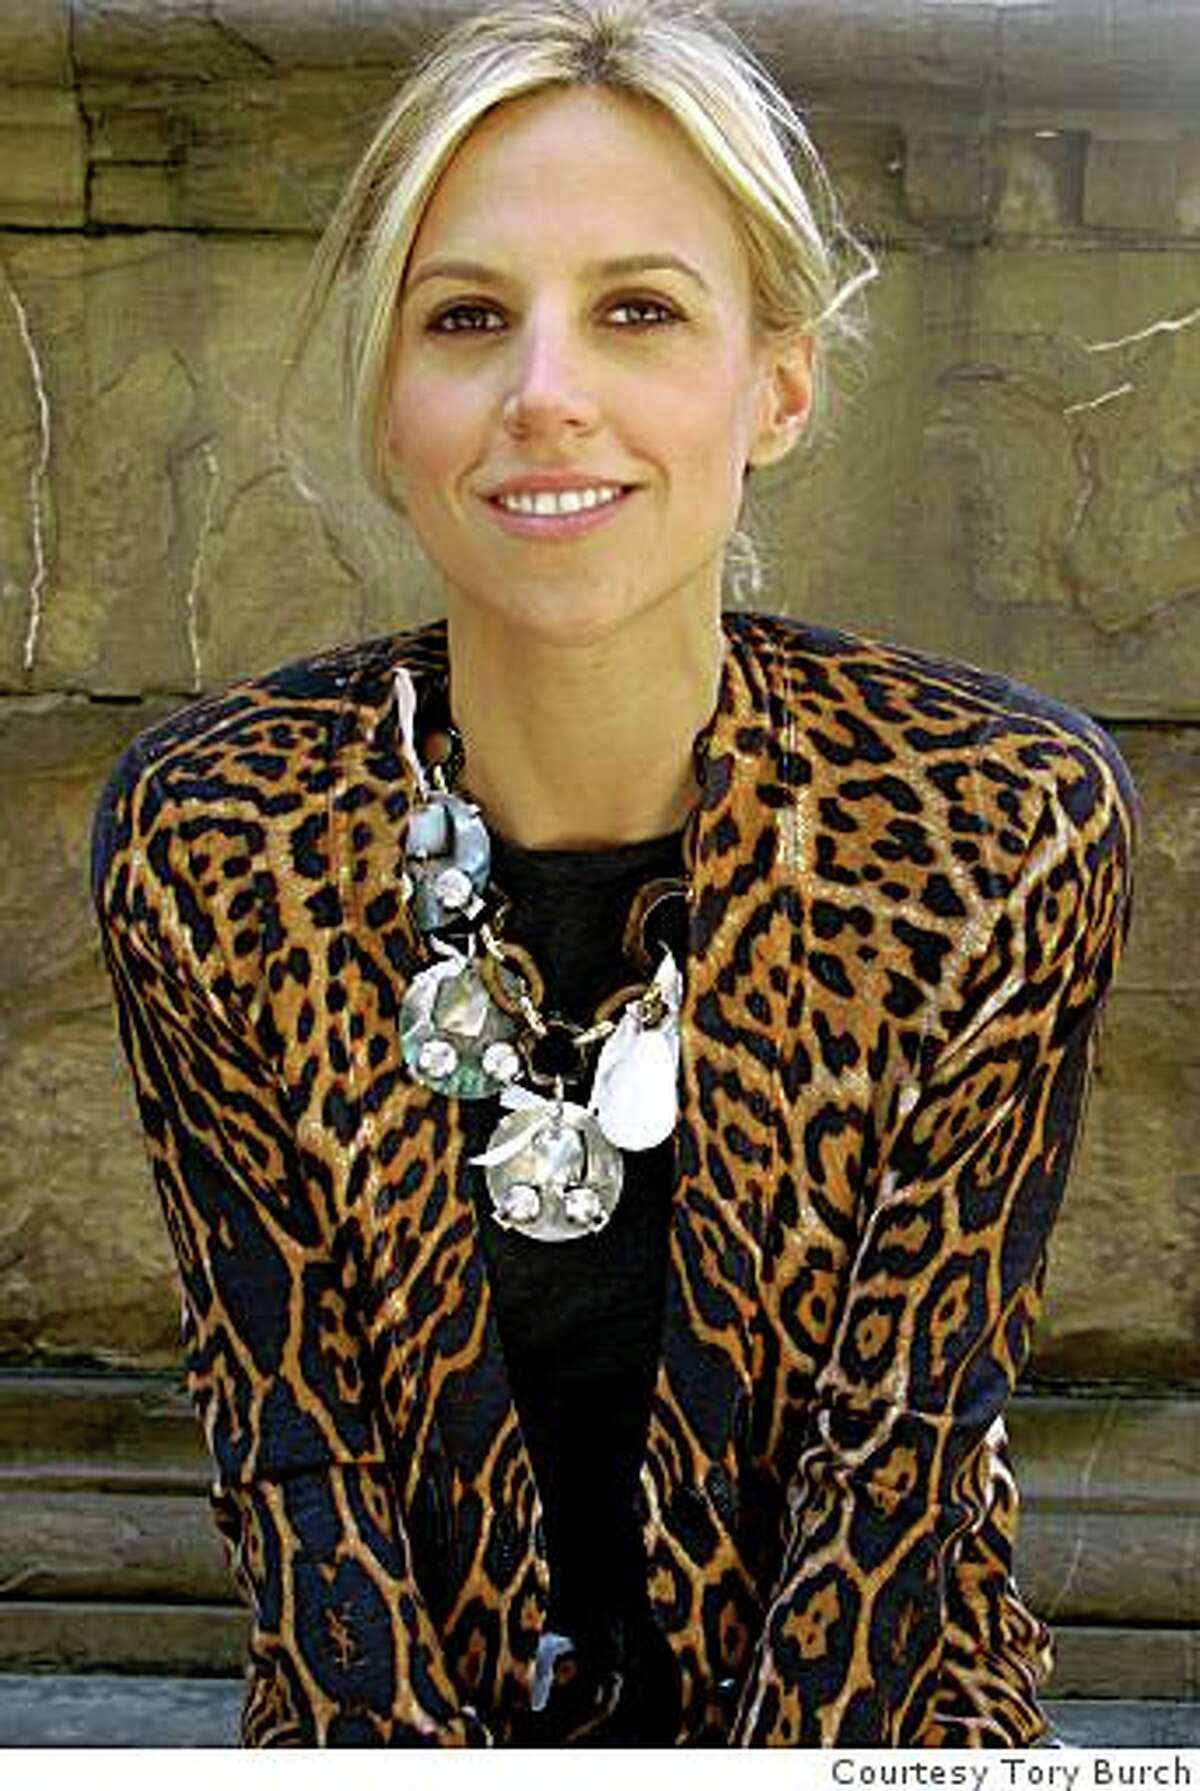 Fashion and accessories designer Tory Burch opens her first SF store will open her first SF store on Maiden Lane on Aug. 18, 2008.